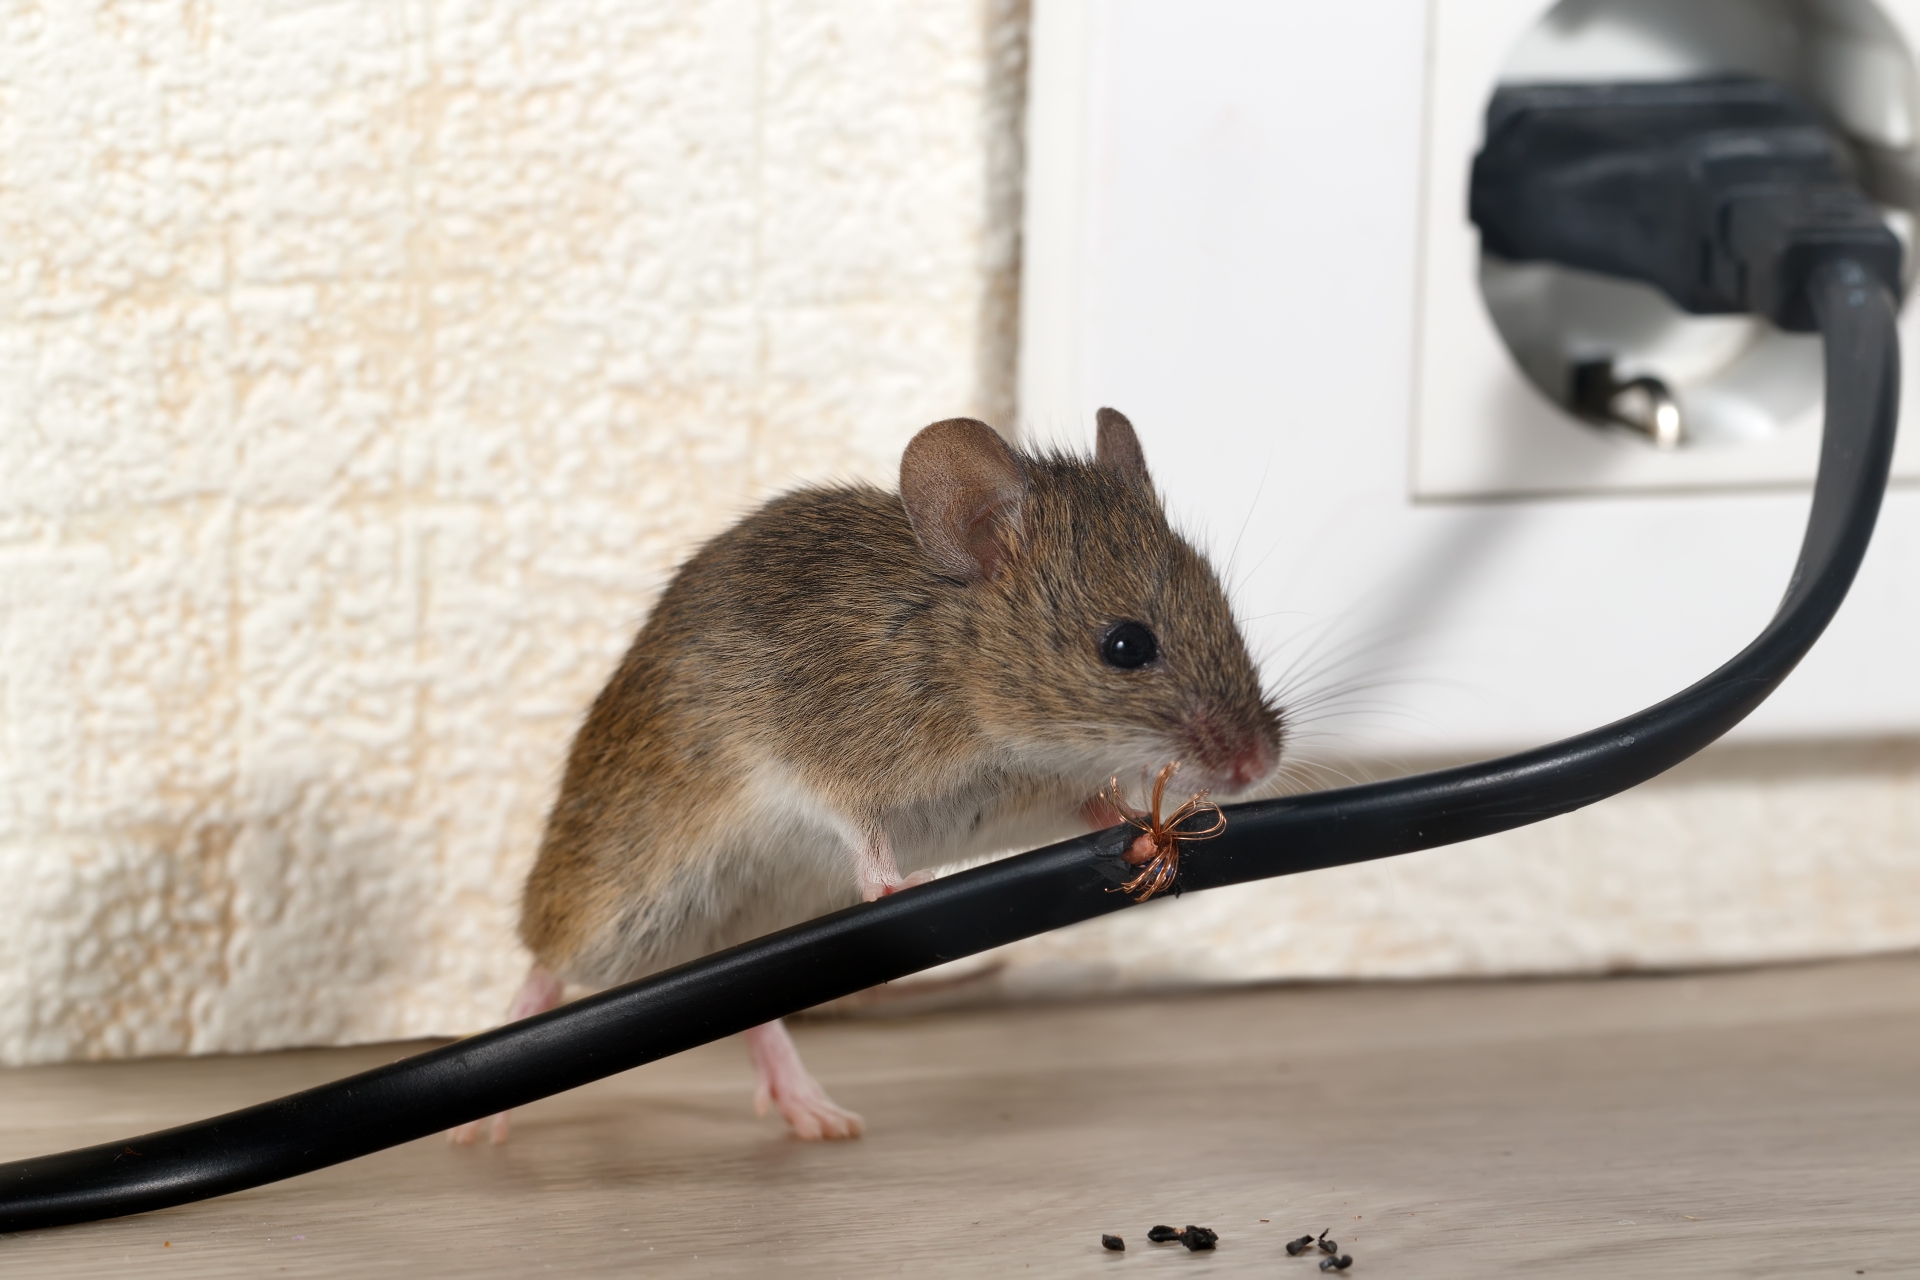 Mice Infestation, Pest Control in Deptford, SE8. Call Now 020 8166 9746